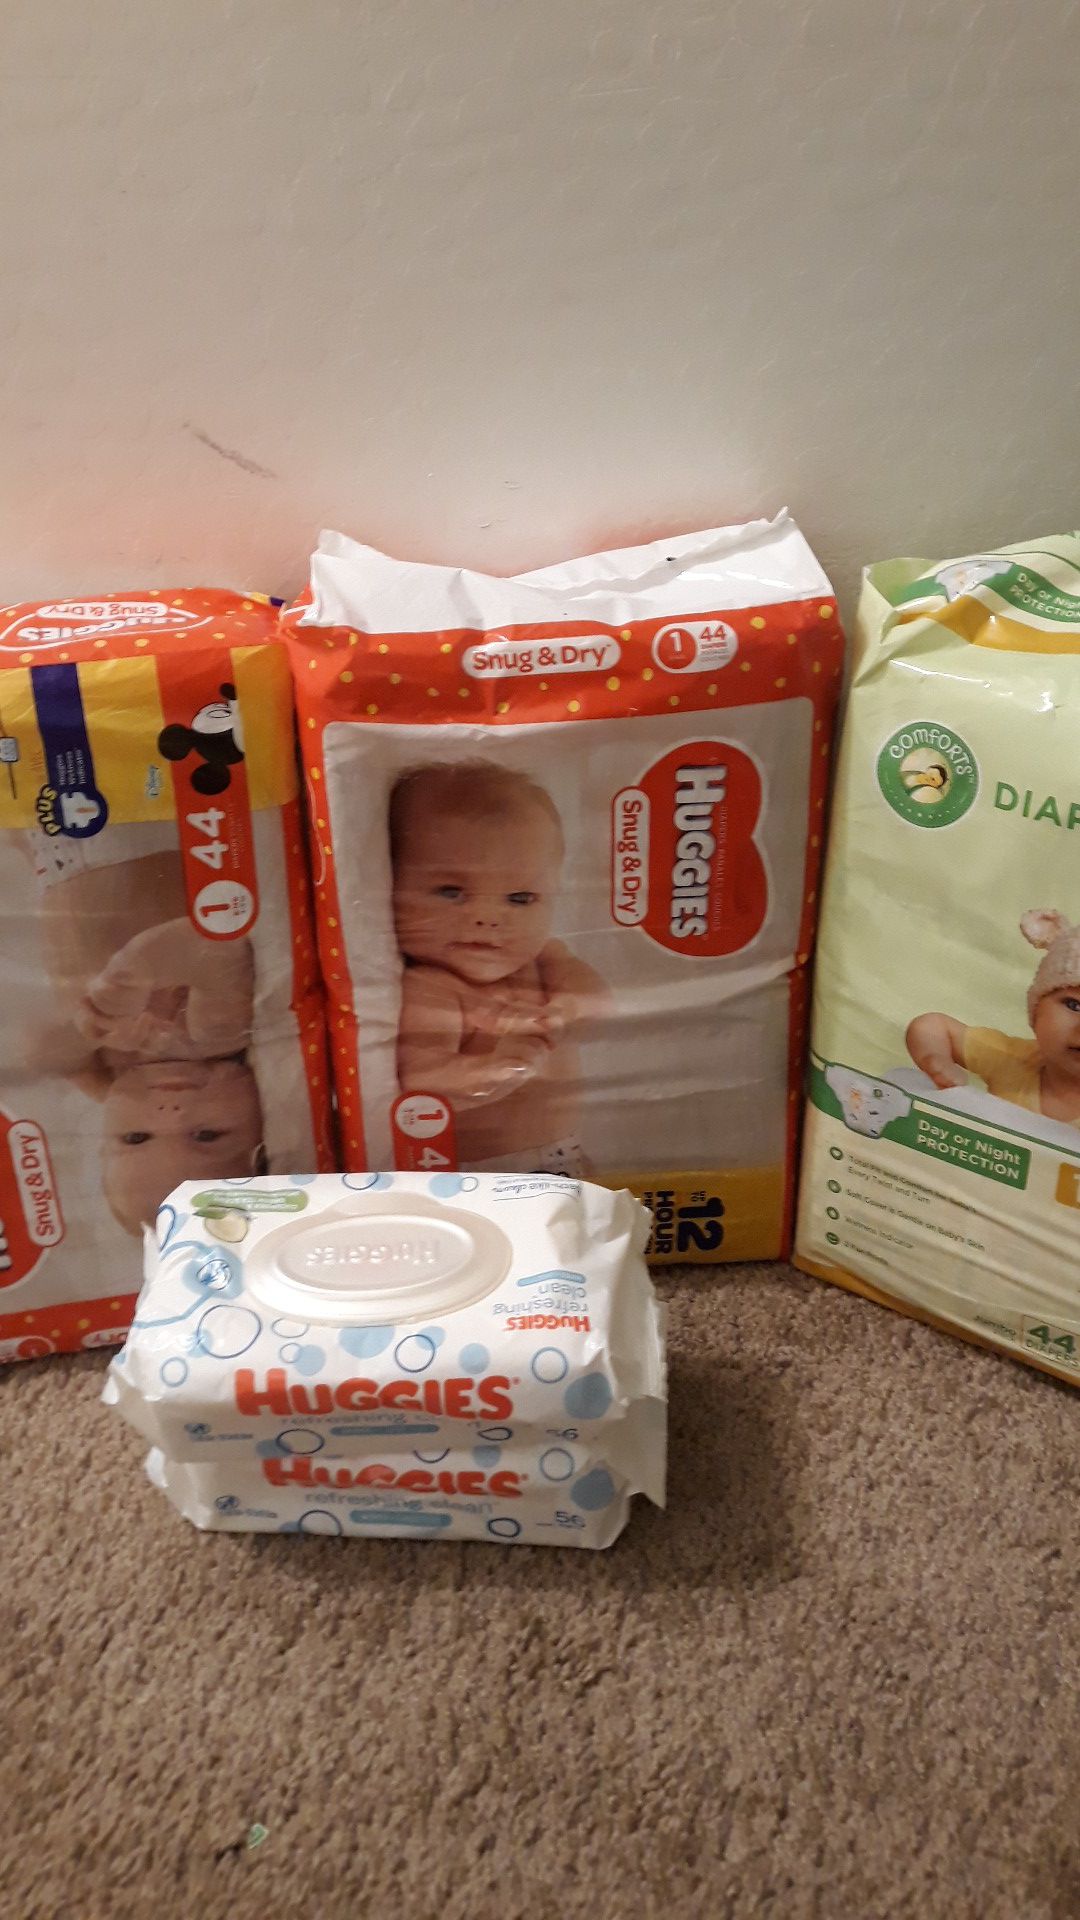 Diapers and wipes size 1